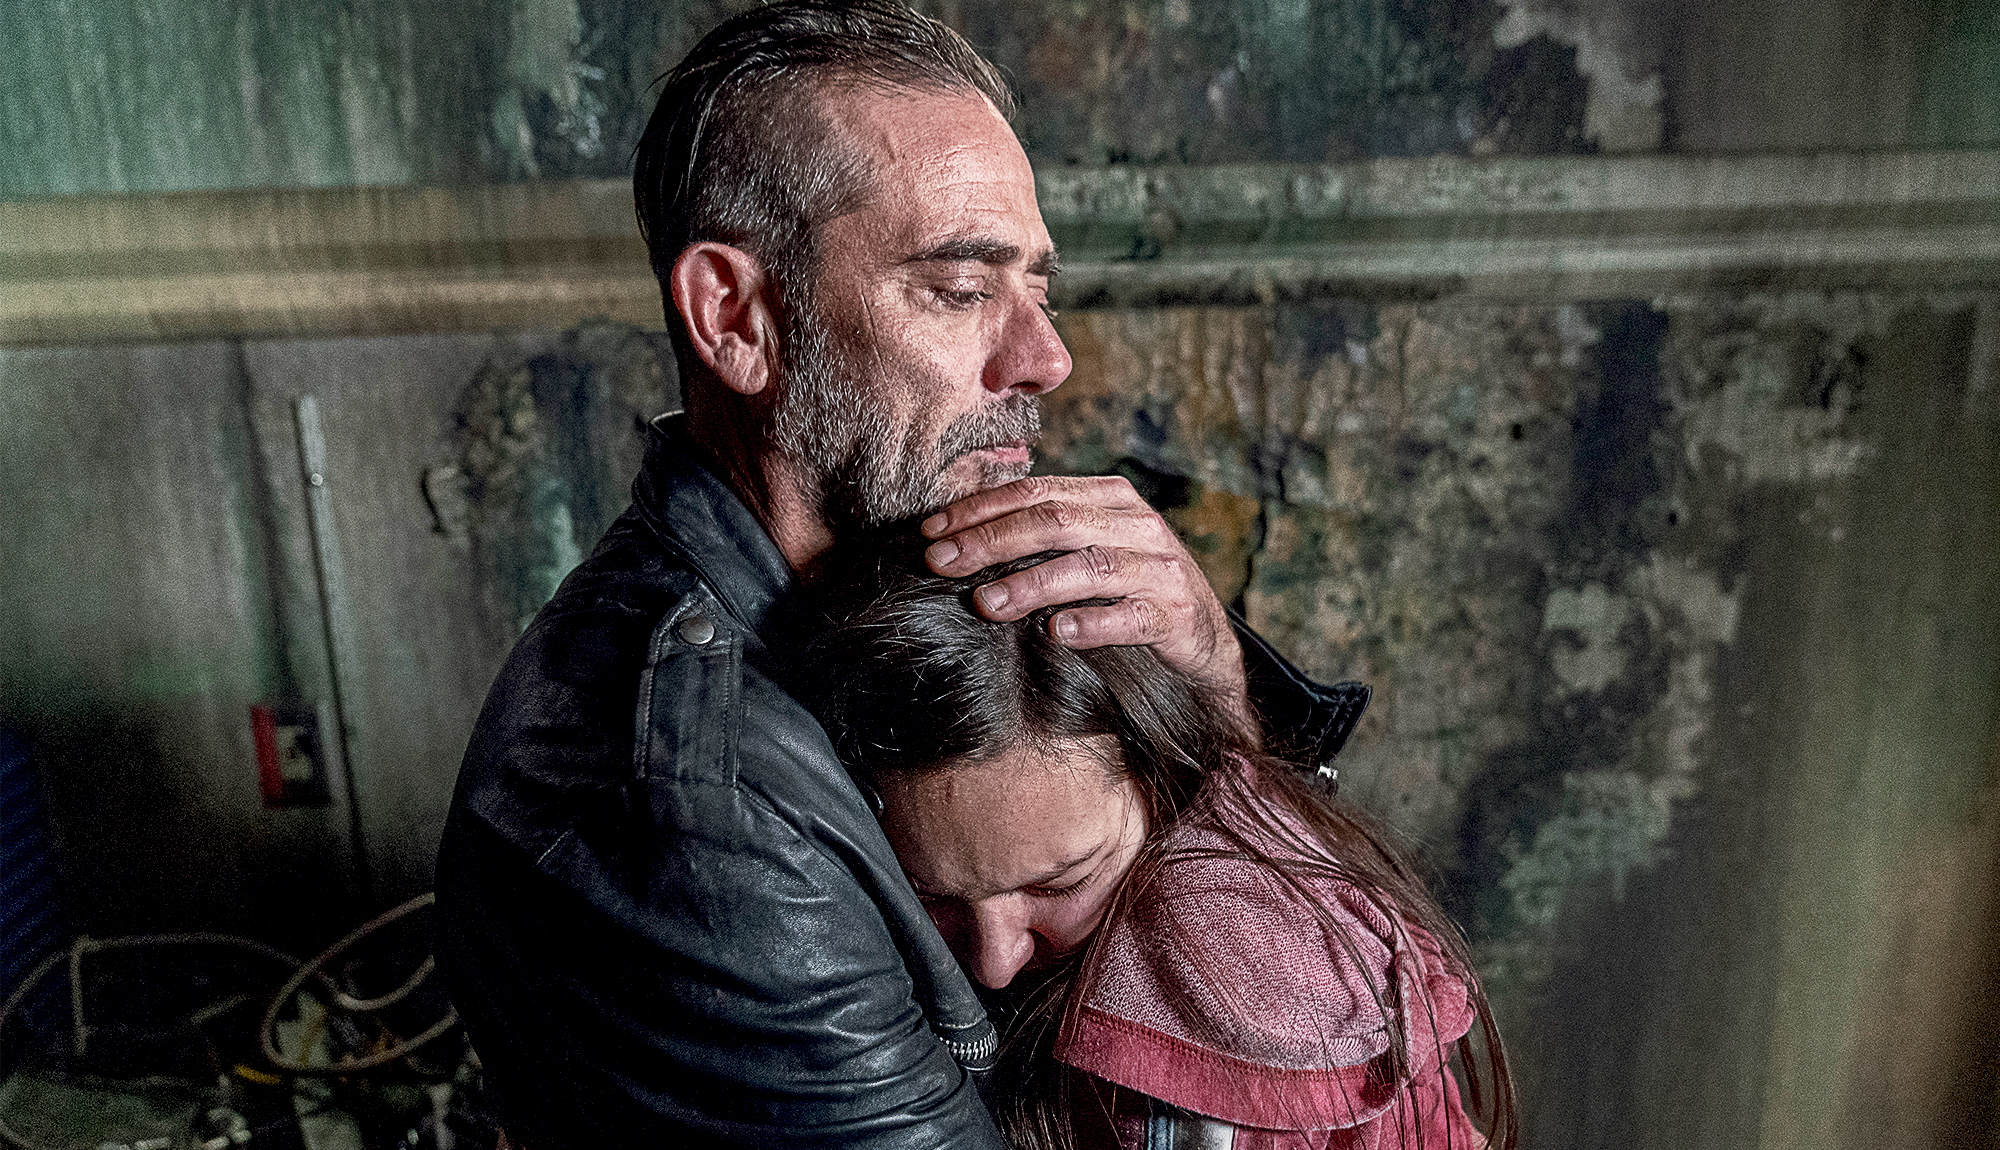 The Best Images From The Walking Dead Episode 1015